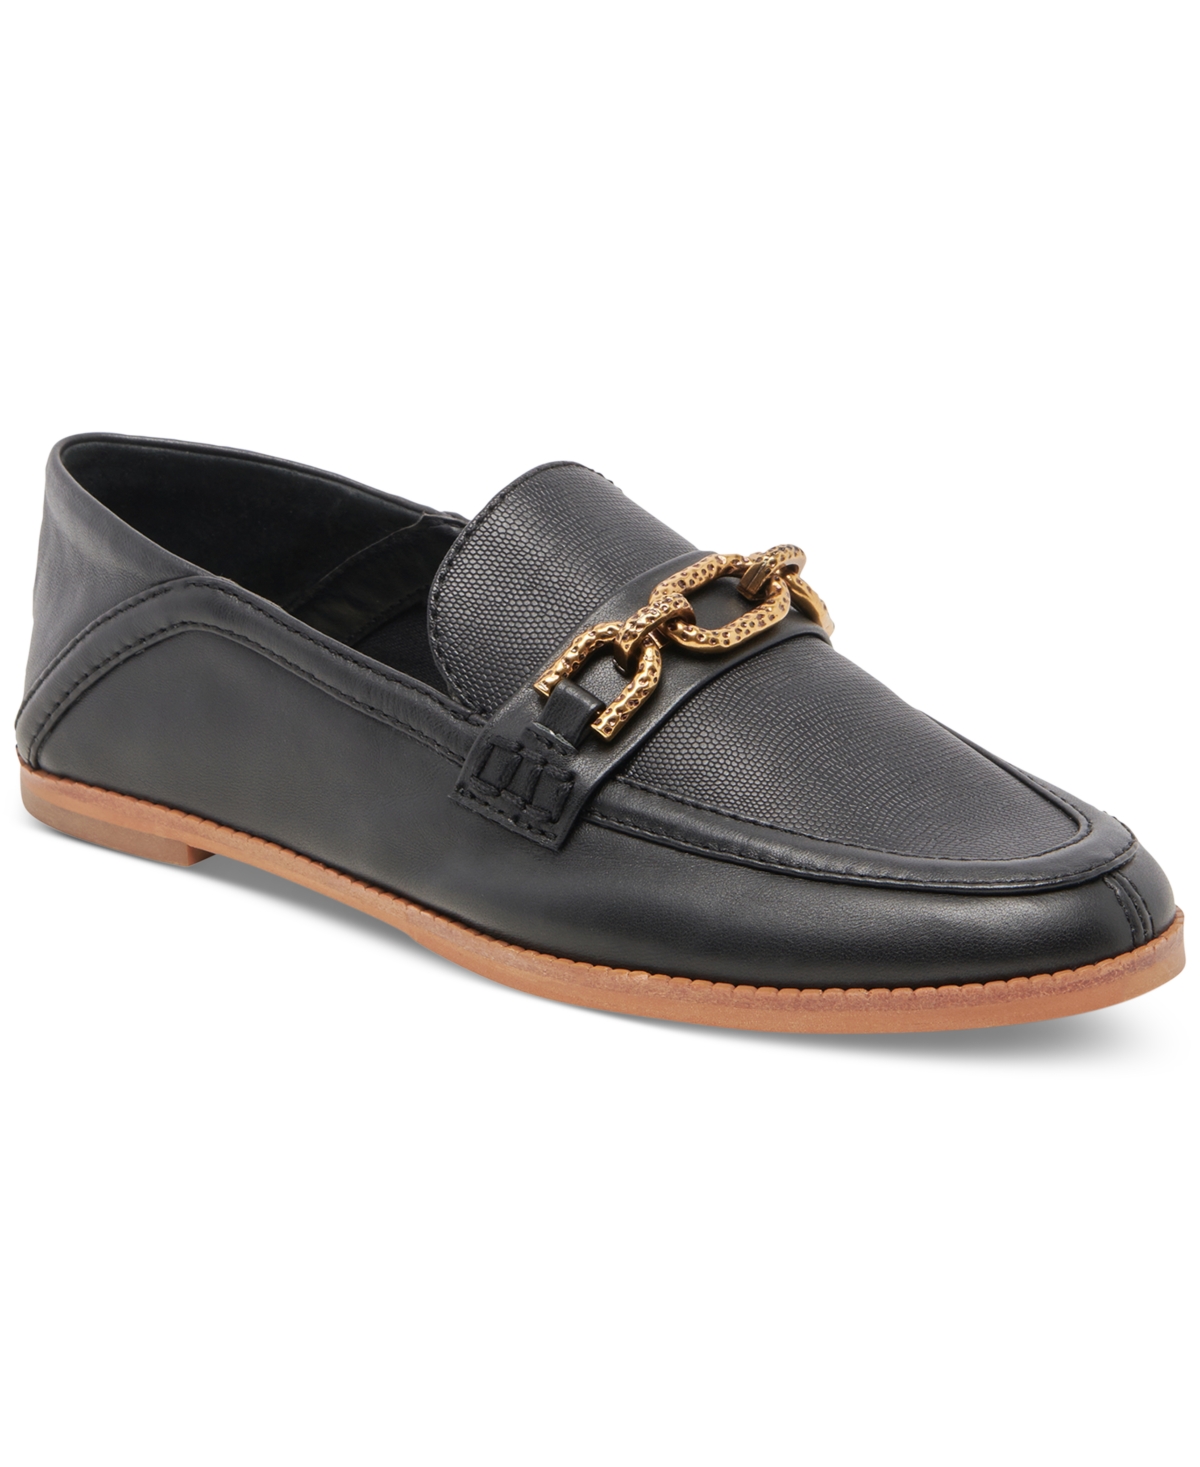 DOLCE VITA WOMEN'S REIGN TAILORED CHAIN LOAFERS